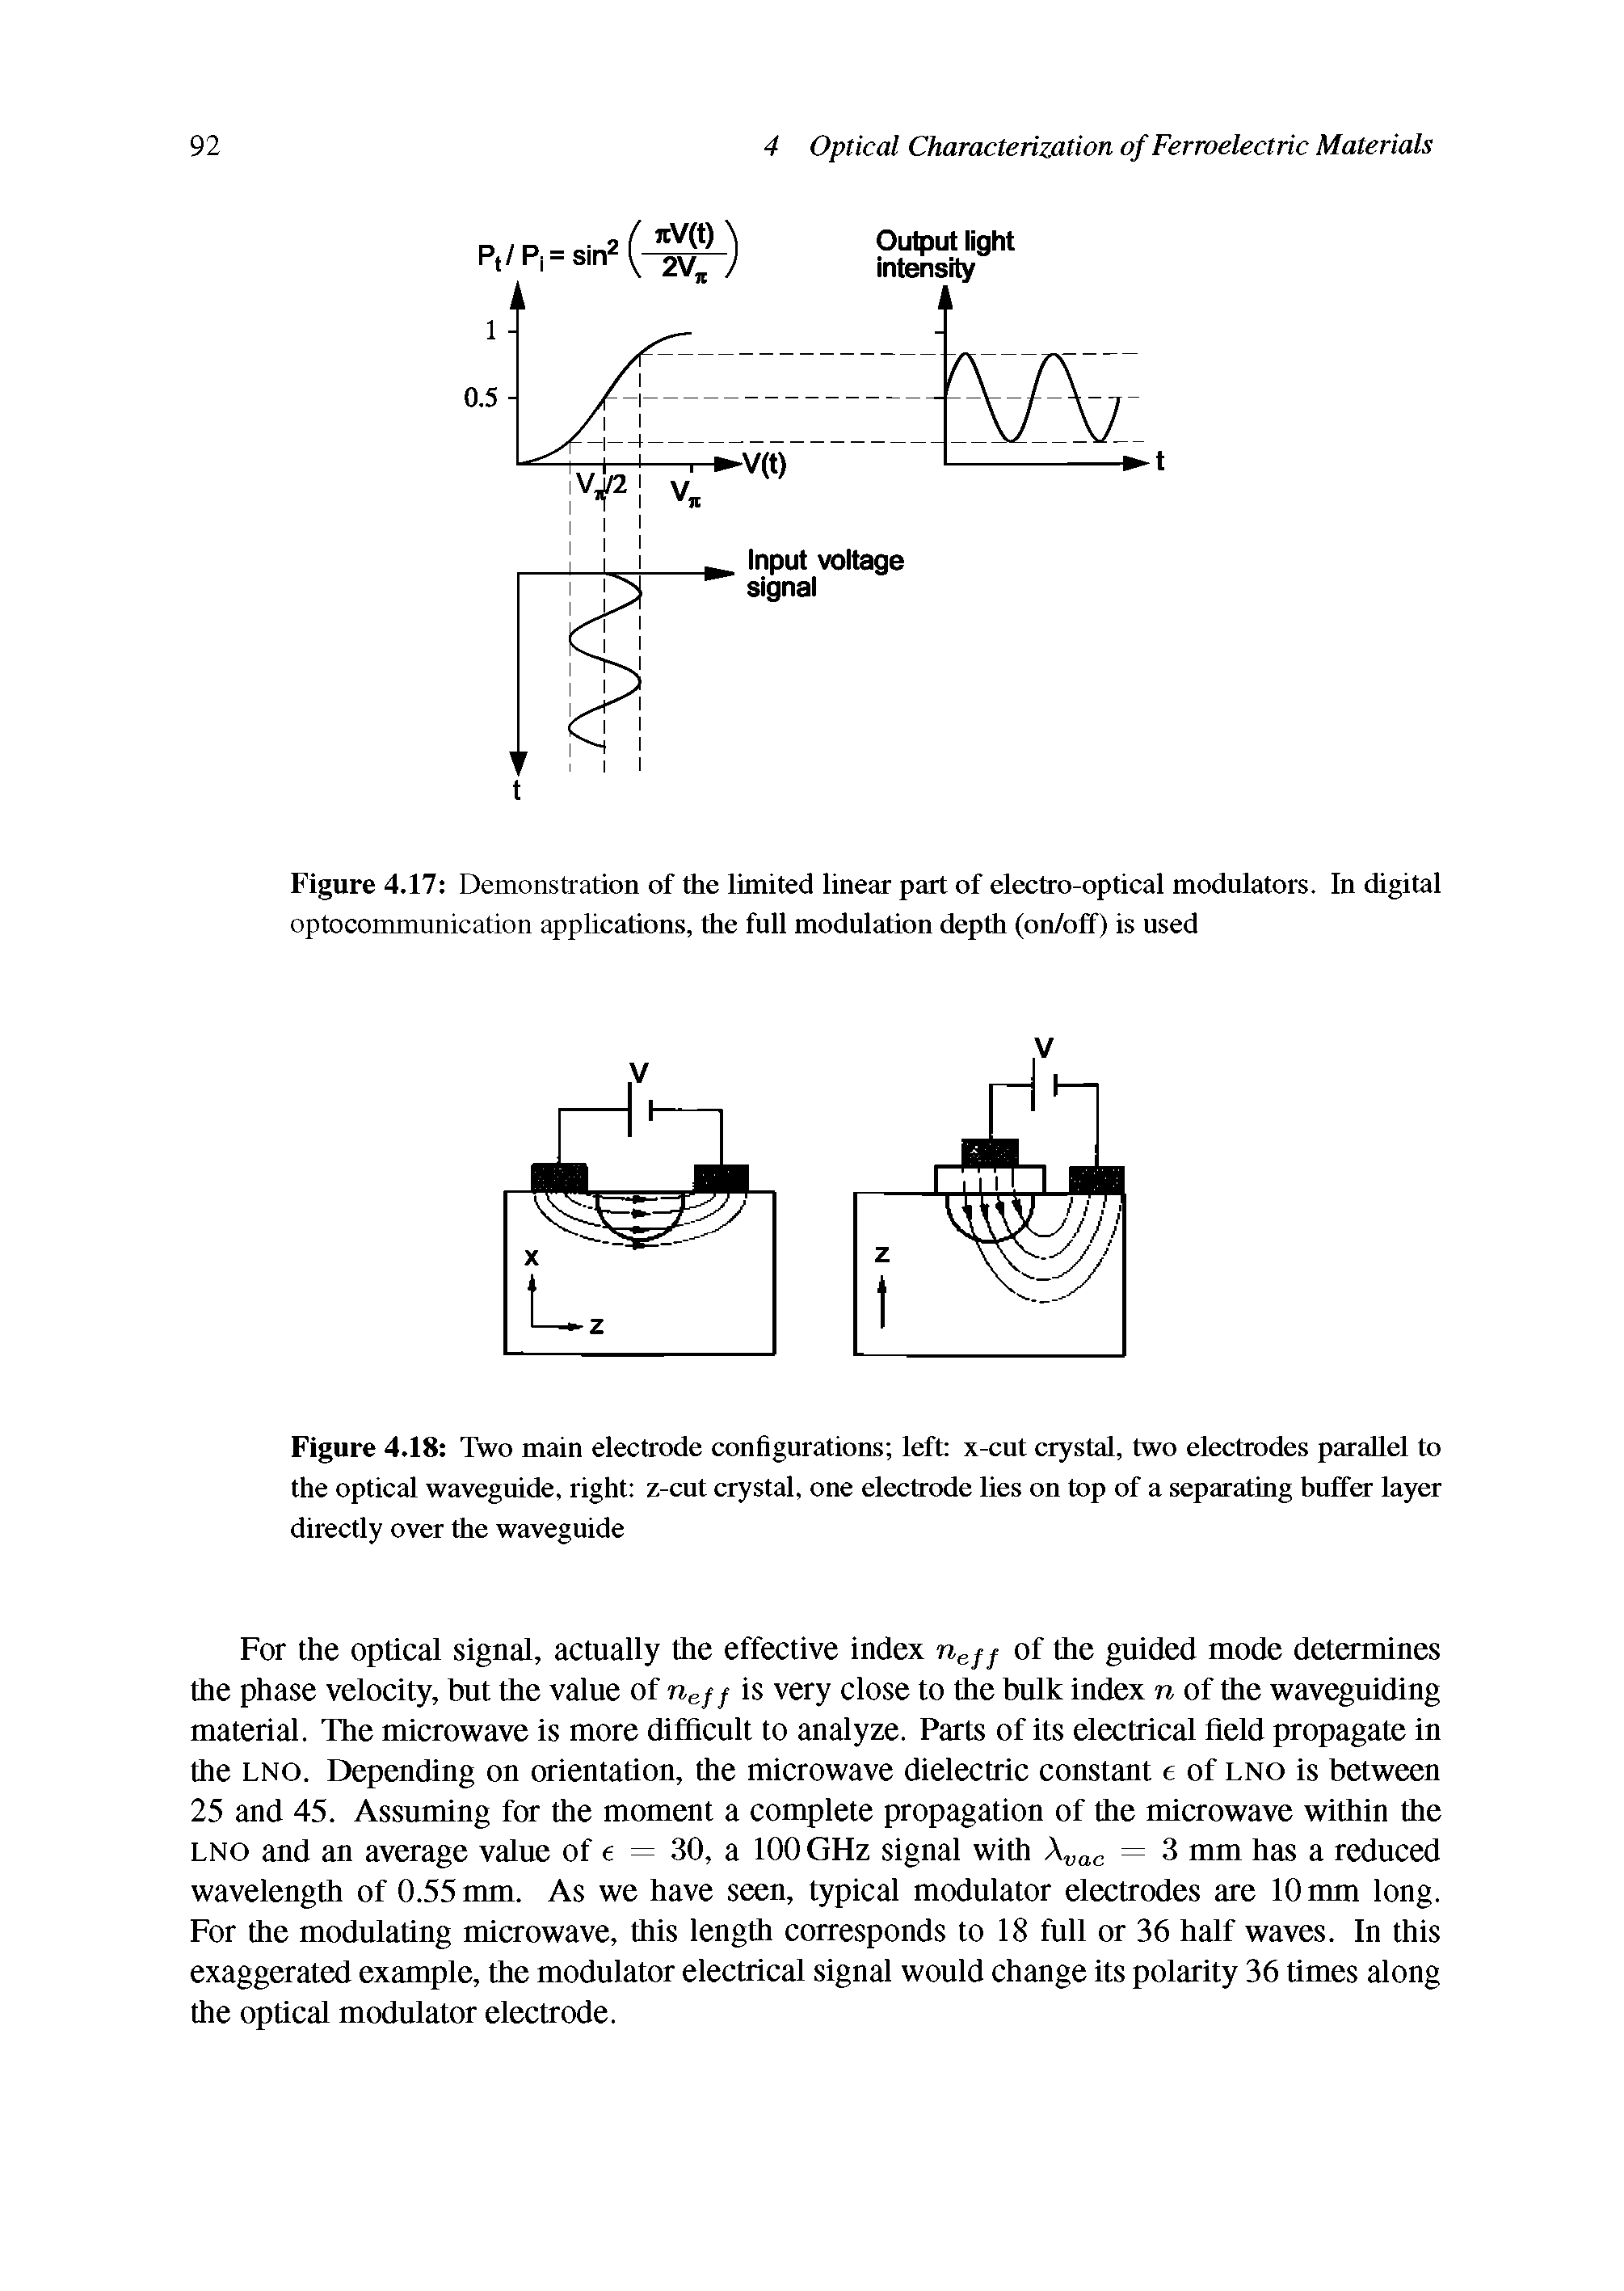 Figure 4.18 Two main electrode configurations left x-cut crystal, two electrodes parallel to the optical waveguide, right z-cut crystal, one electrode lies on top of a separating buffer layer directly over the waveguide...